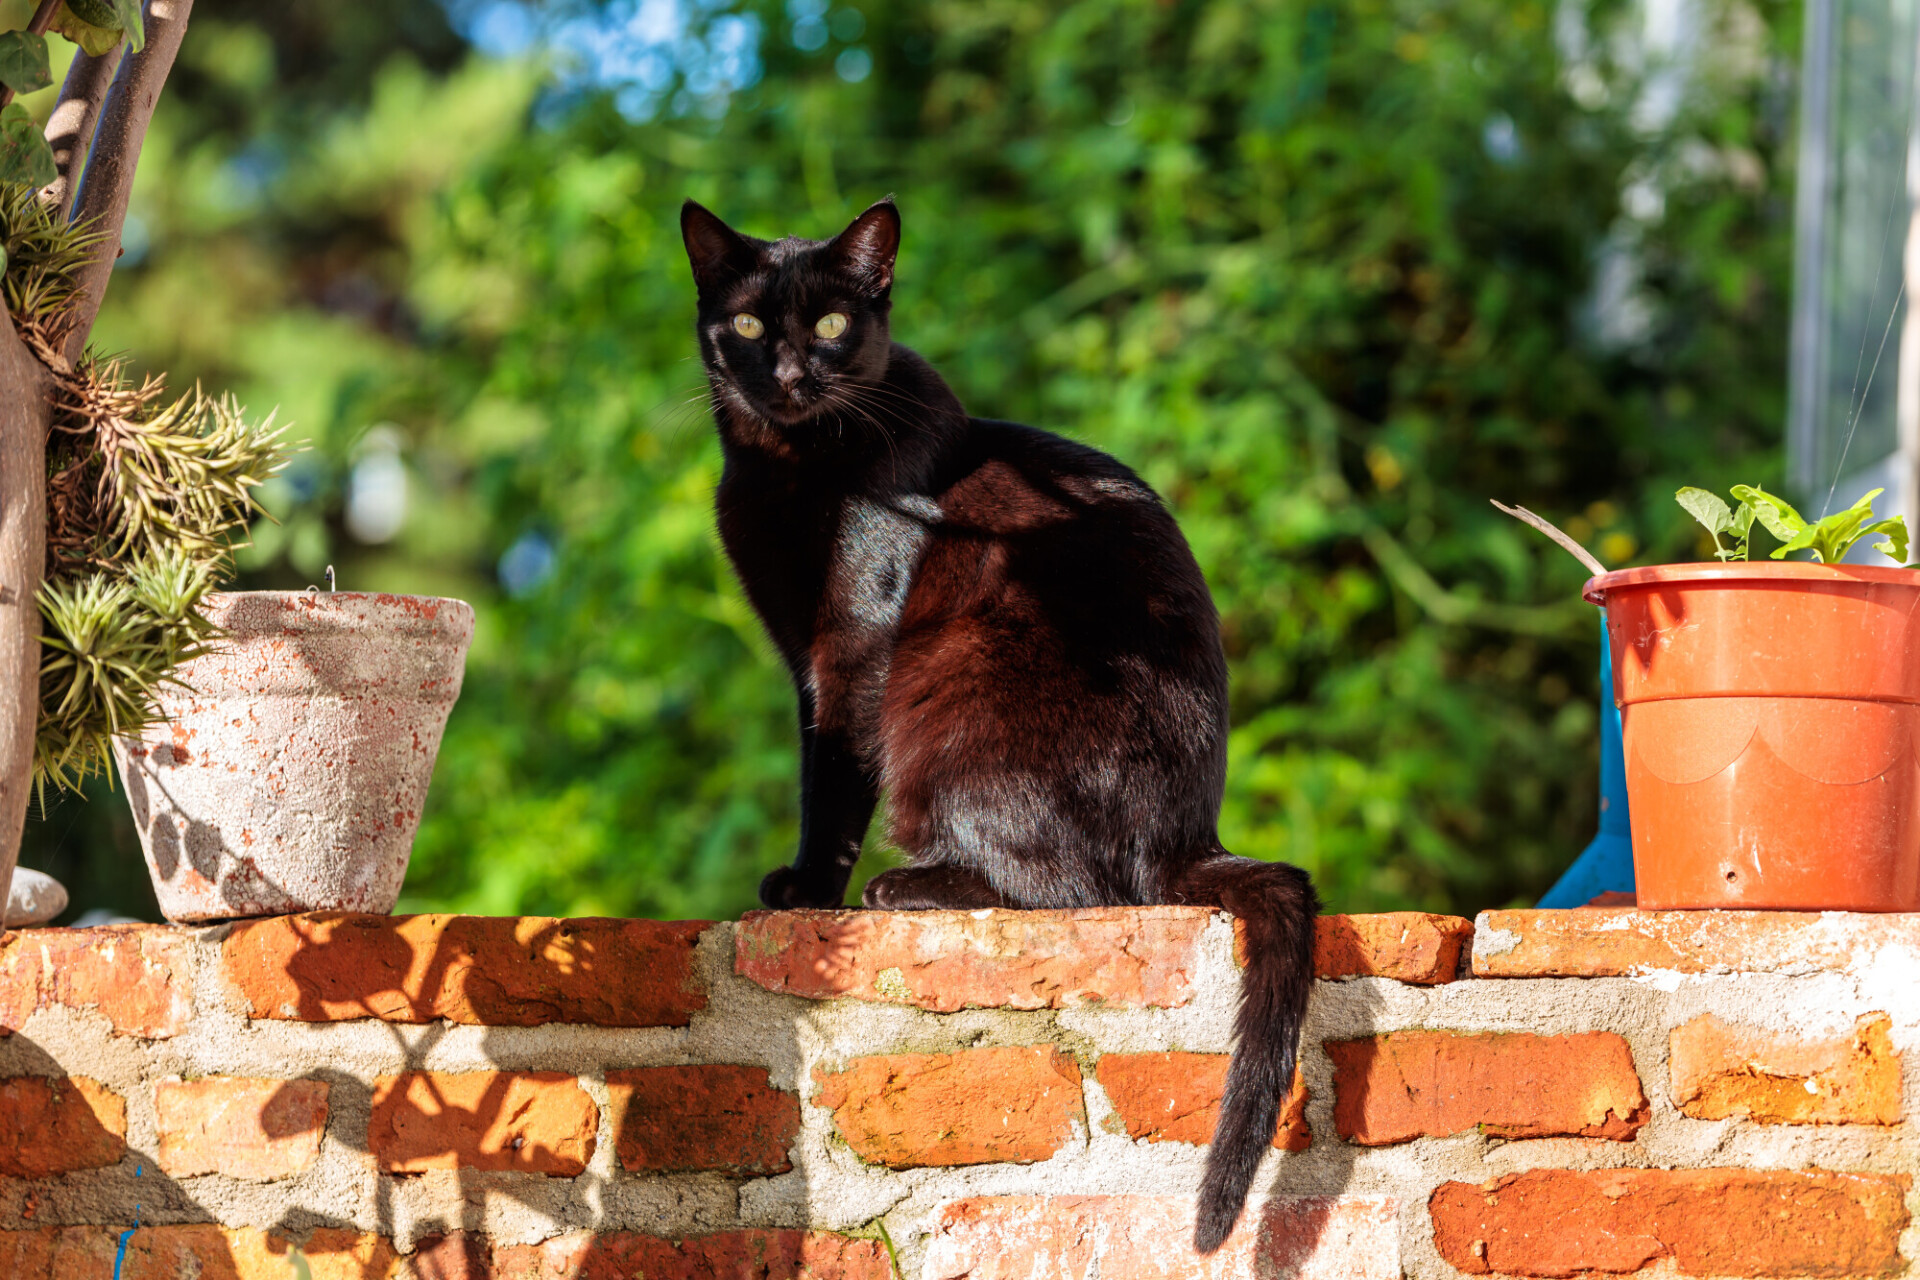 Black cat on a red brick wall